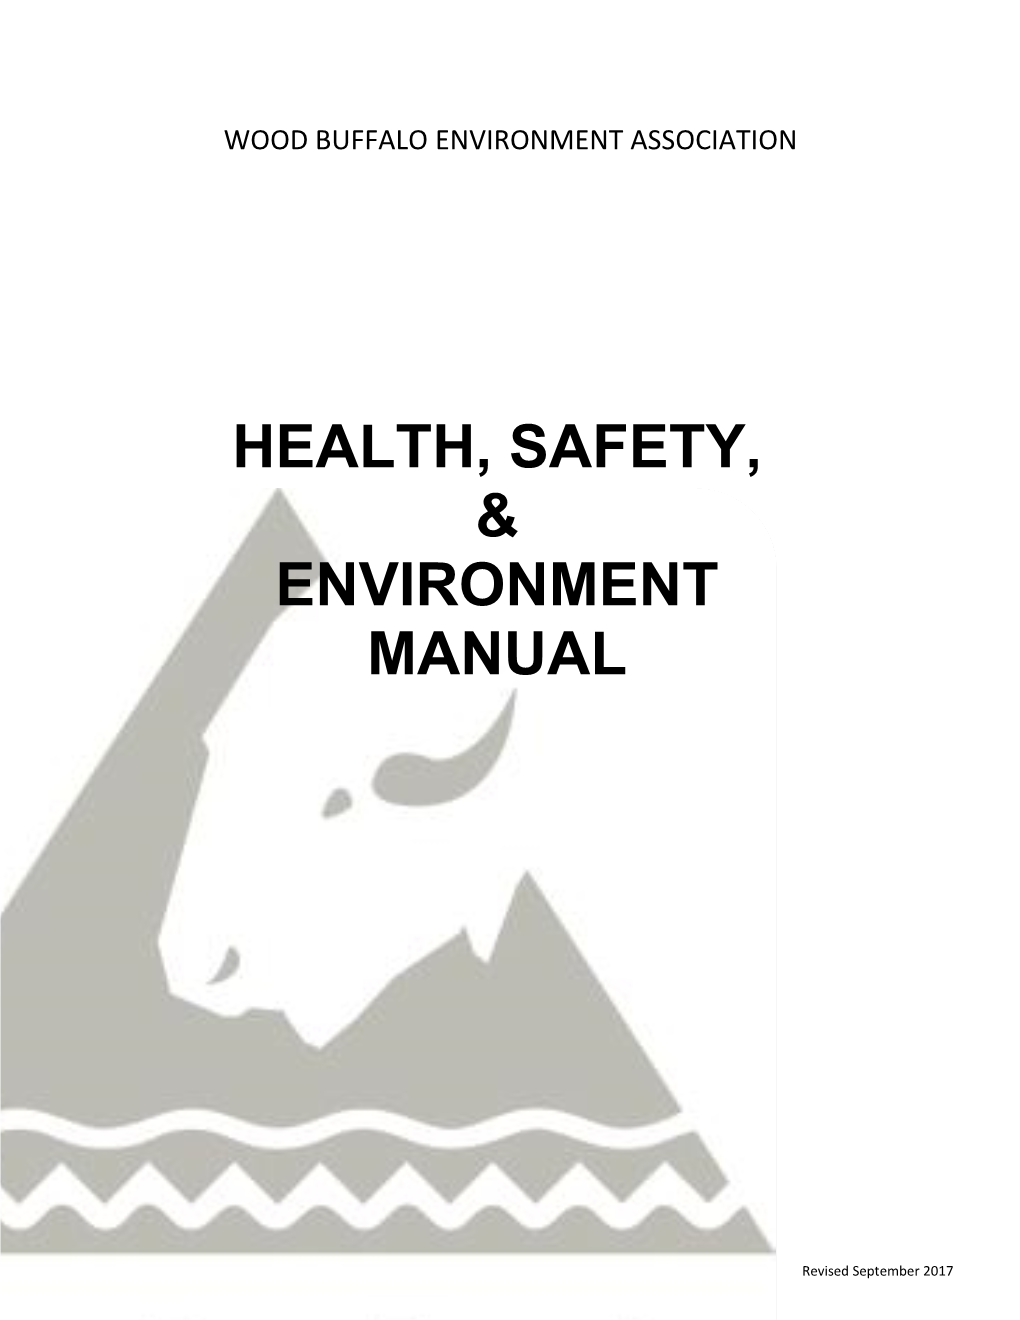 WBEA Health, Safety & Environment Manual 2017